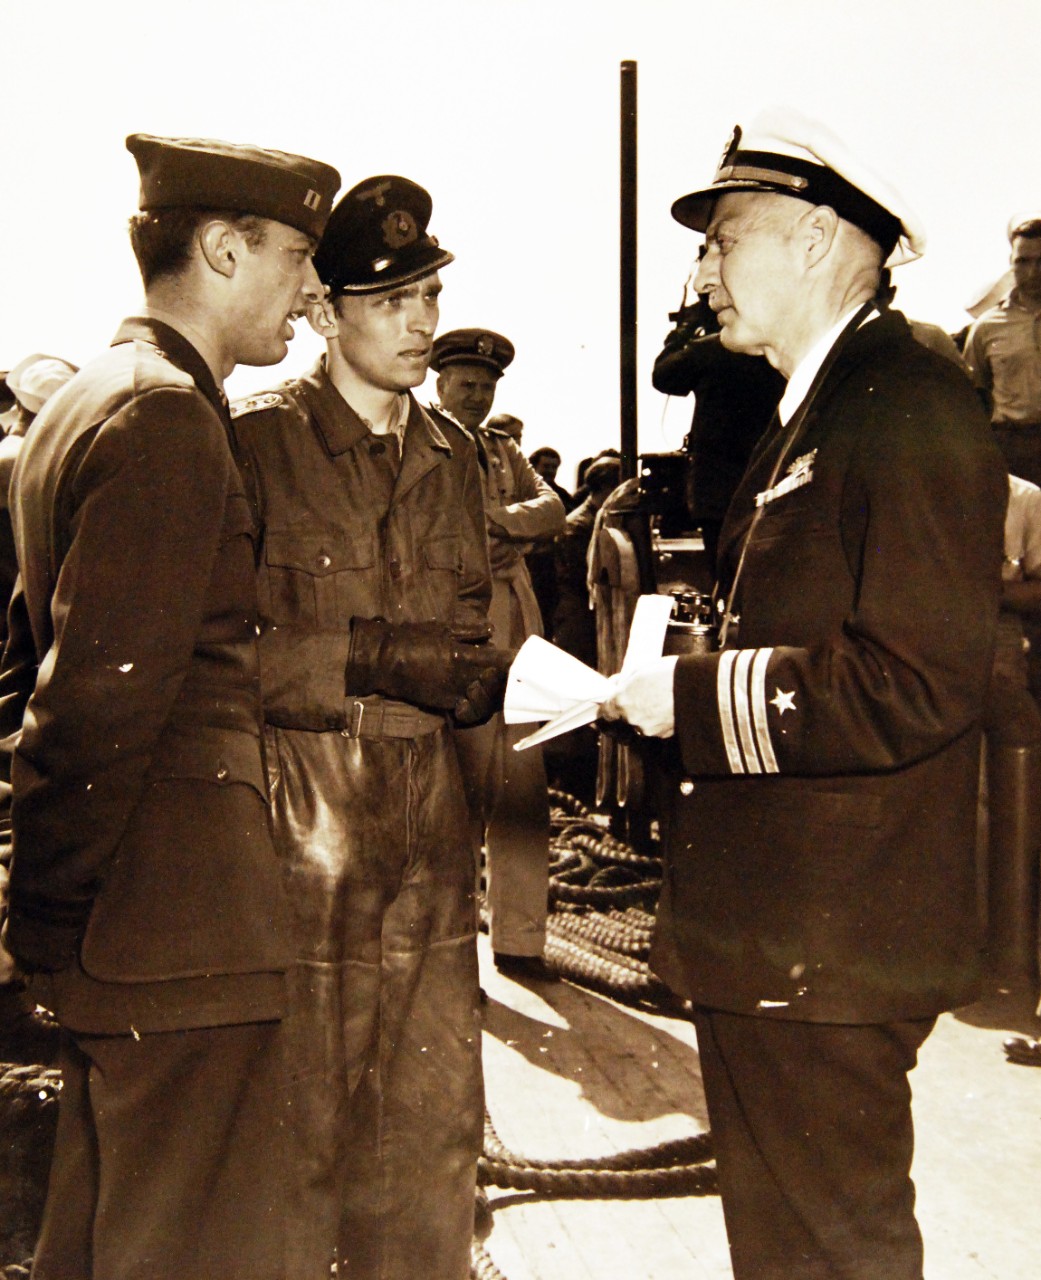 80-G-320315: Surrender of German U-boats, WWII.  Surrender of German U-boat, U-858, 700 miles off the New England Coast to two destroyer escorts, May 10, 1945.  Shown:  Commander J. P. Norfleet, USN, (Retired), right, accepts the surrender of the U-boat Captain, Kapitanleutnant Thilo Bode.  At left is Lieutenant Robert H. Braun, USNR.    Official U.S. Navy Photograph, now in the collections of the National Archives.  (2017/07/18).